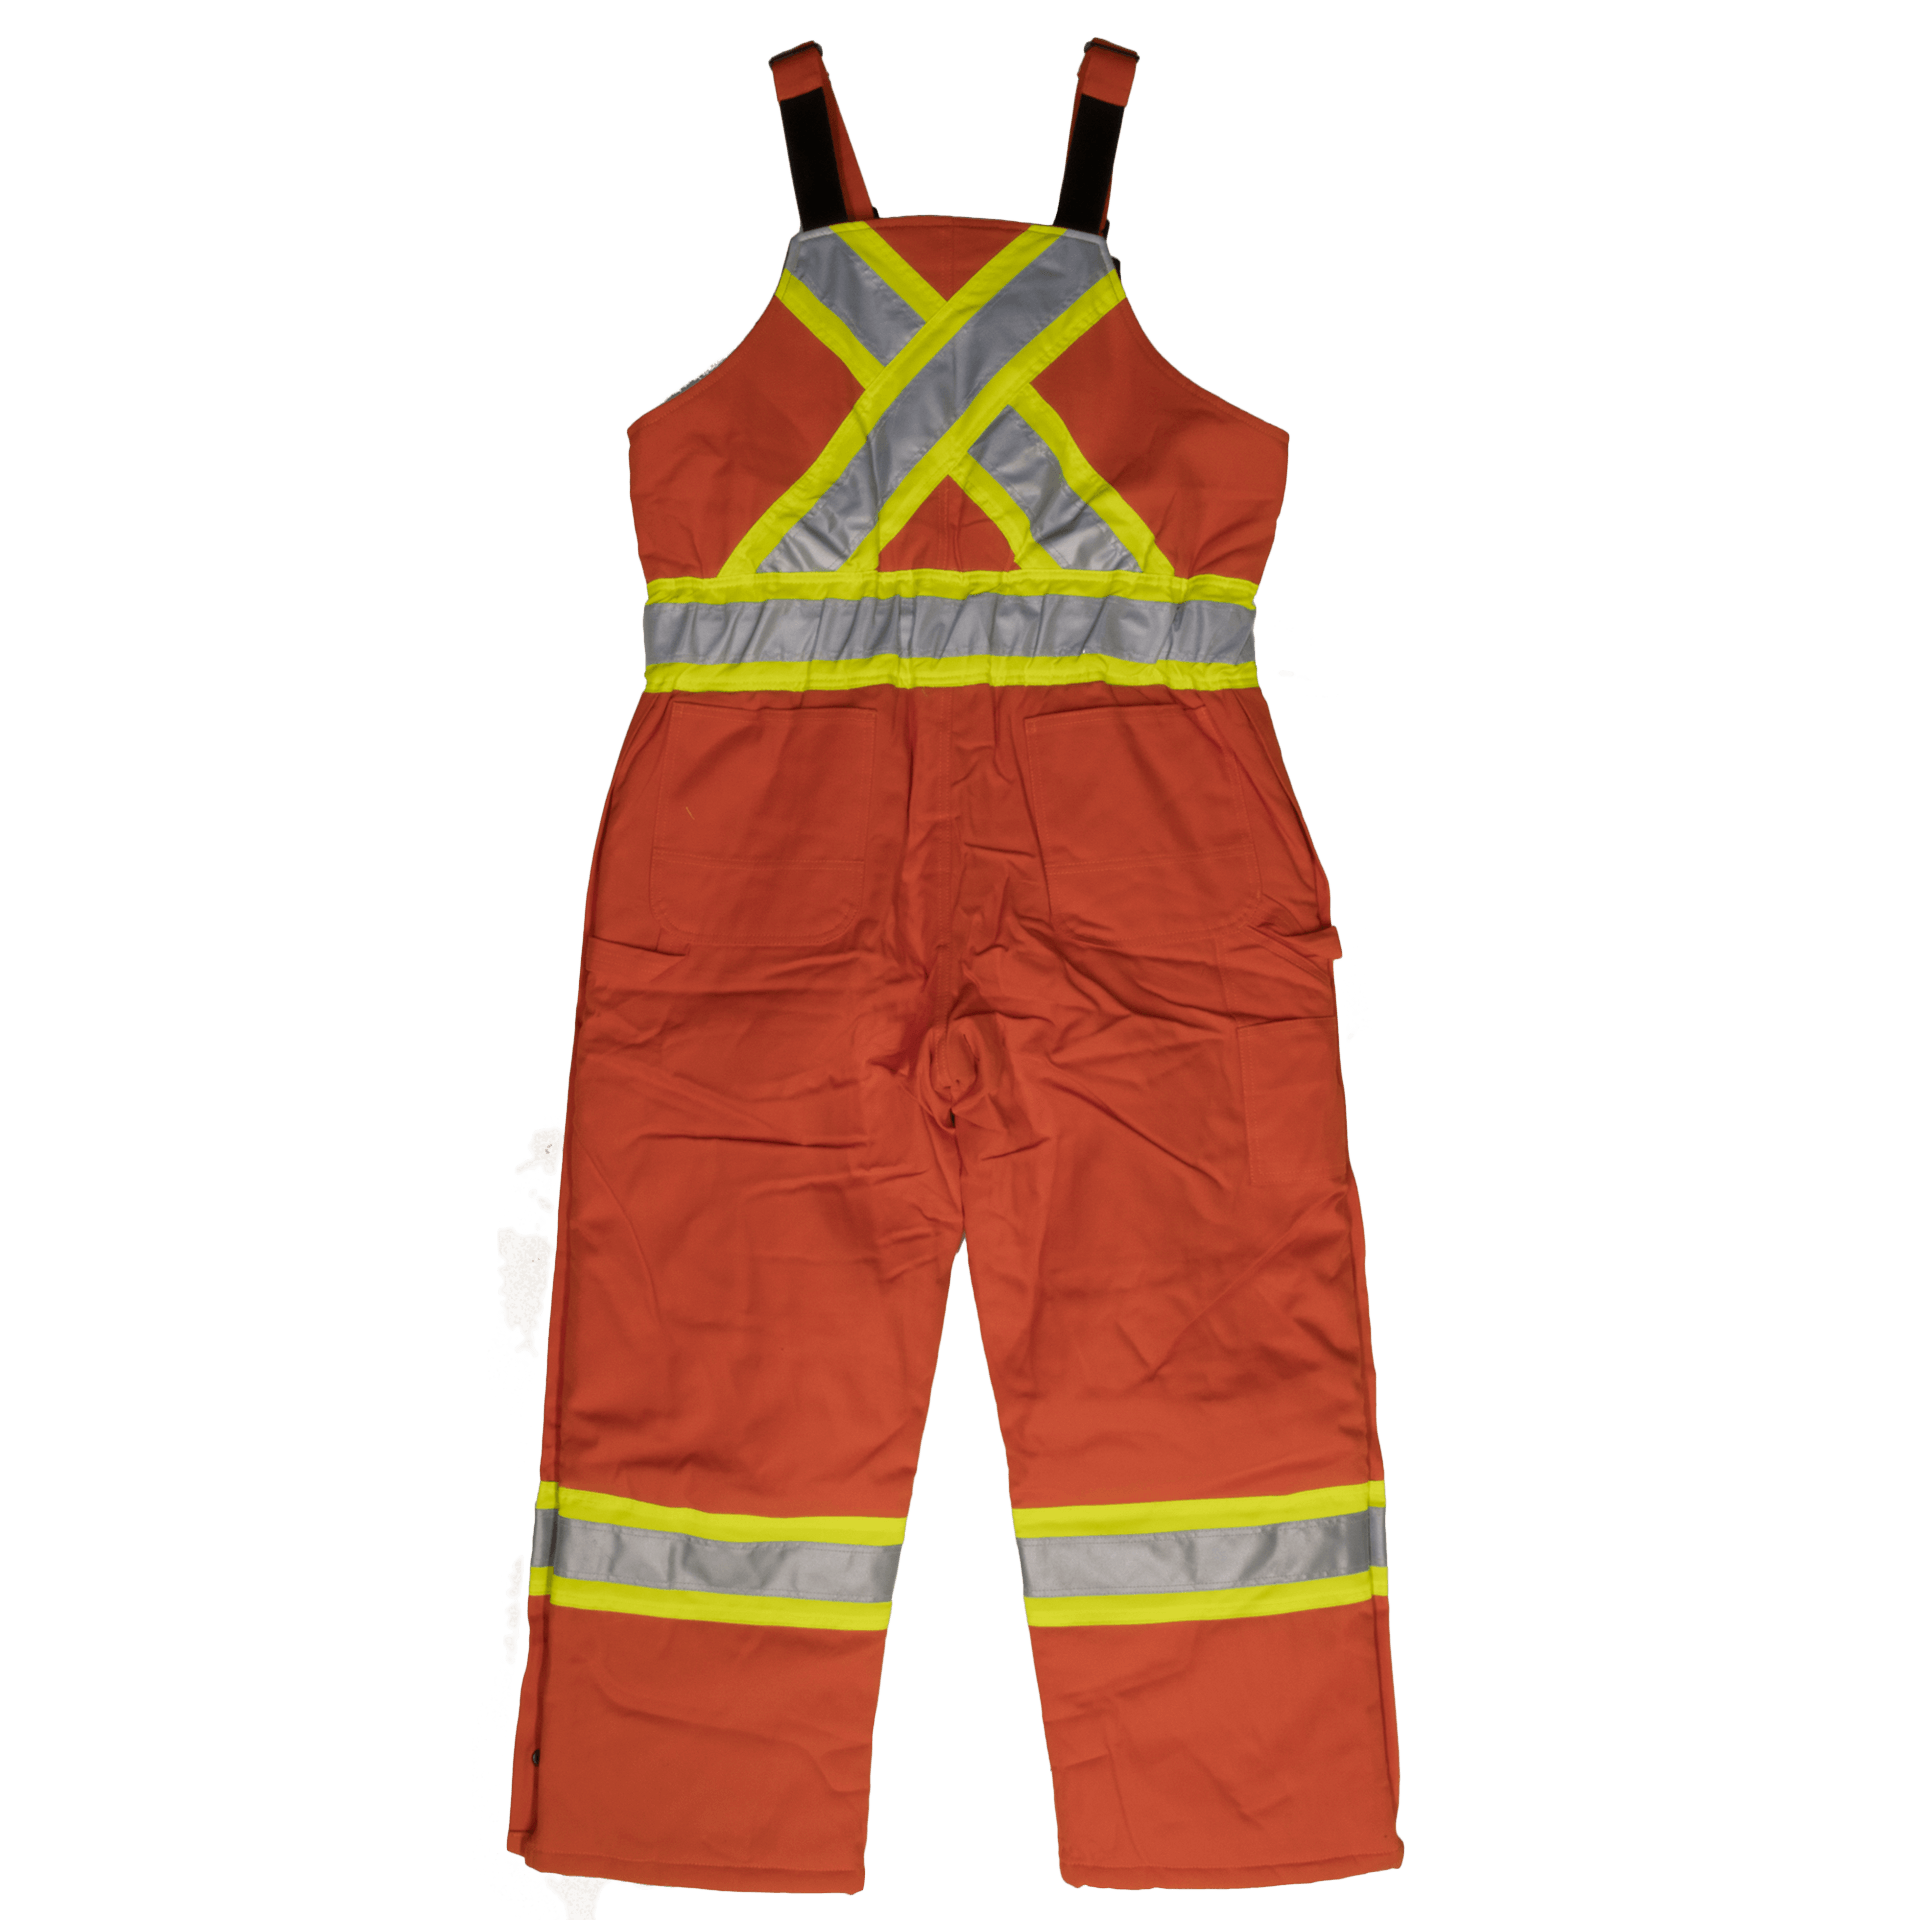 Tough Duck Insulated Safety Overall (Cotton Duck) - S757 - Orange - back